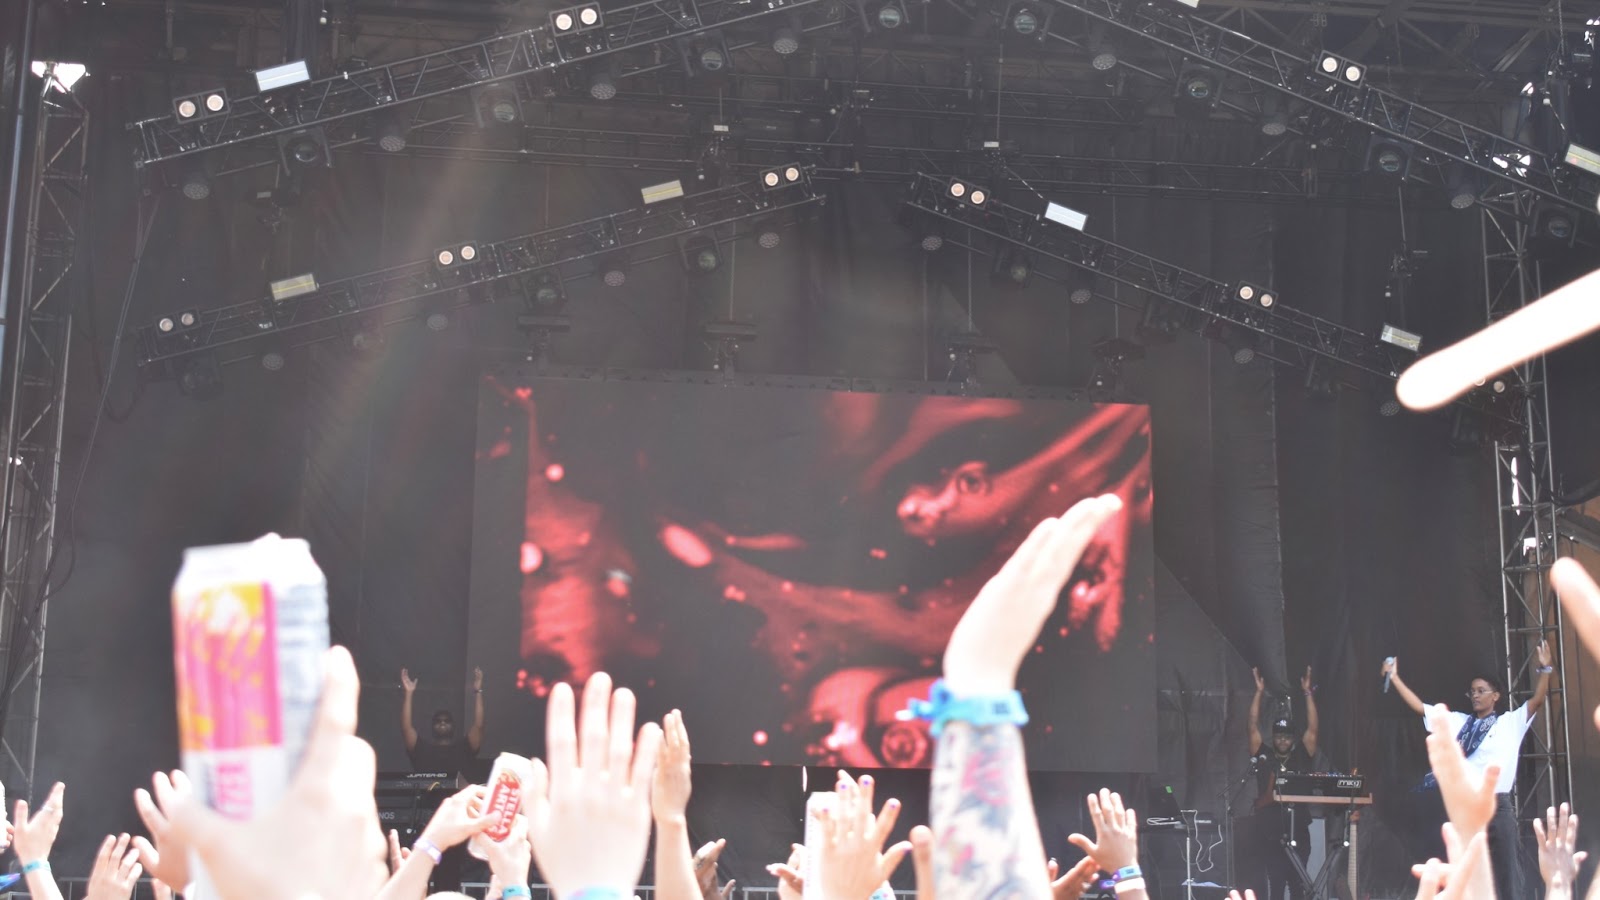 Hands waving in the air in front of a red backdrop at a daytime concert.